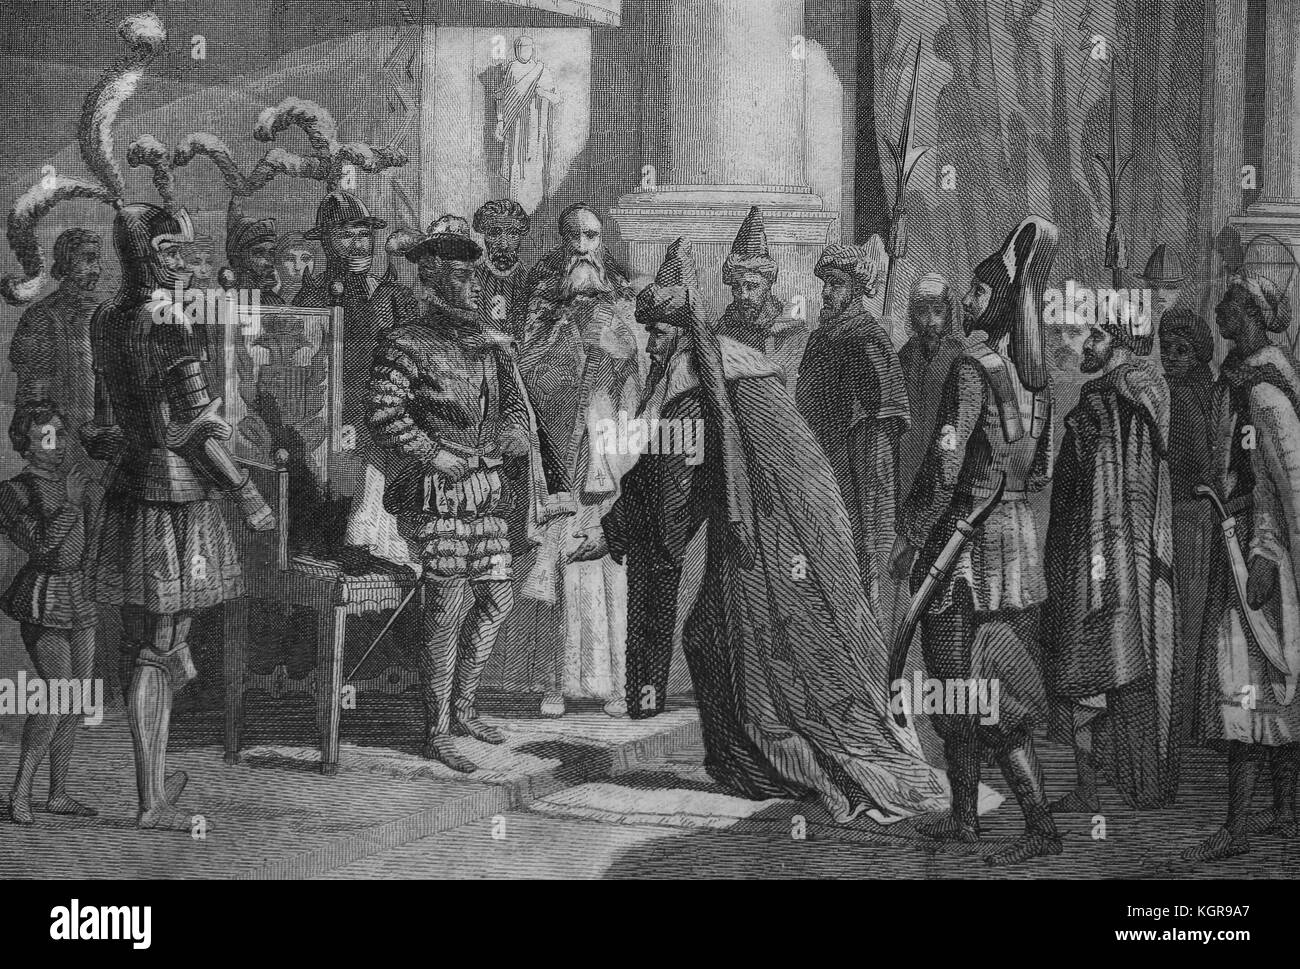 The Bey of Tunis interviewing with Emperor Charles V (1500-1558). Engraving, 1863. Stock Photo